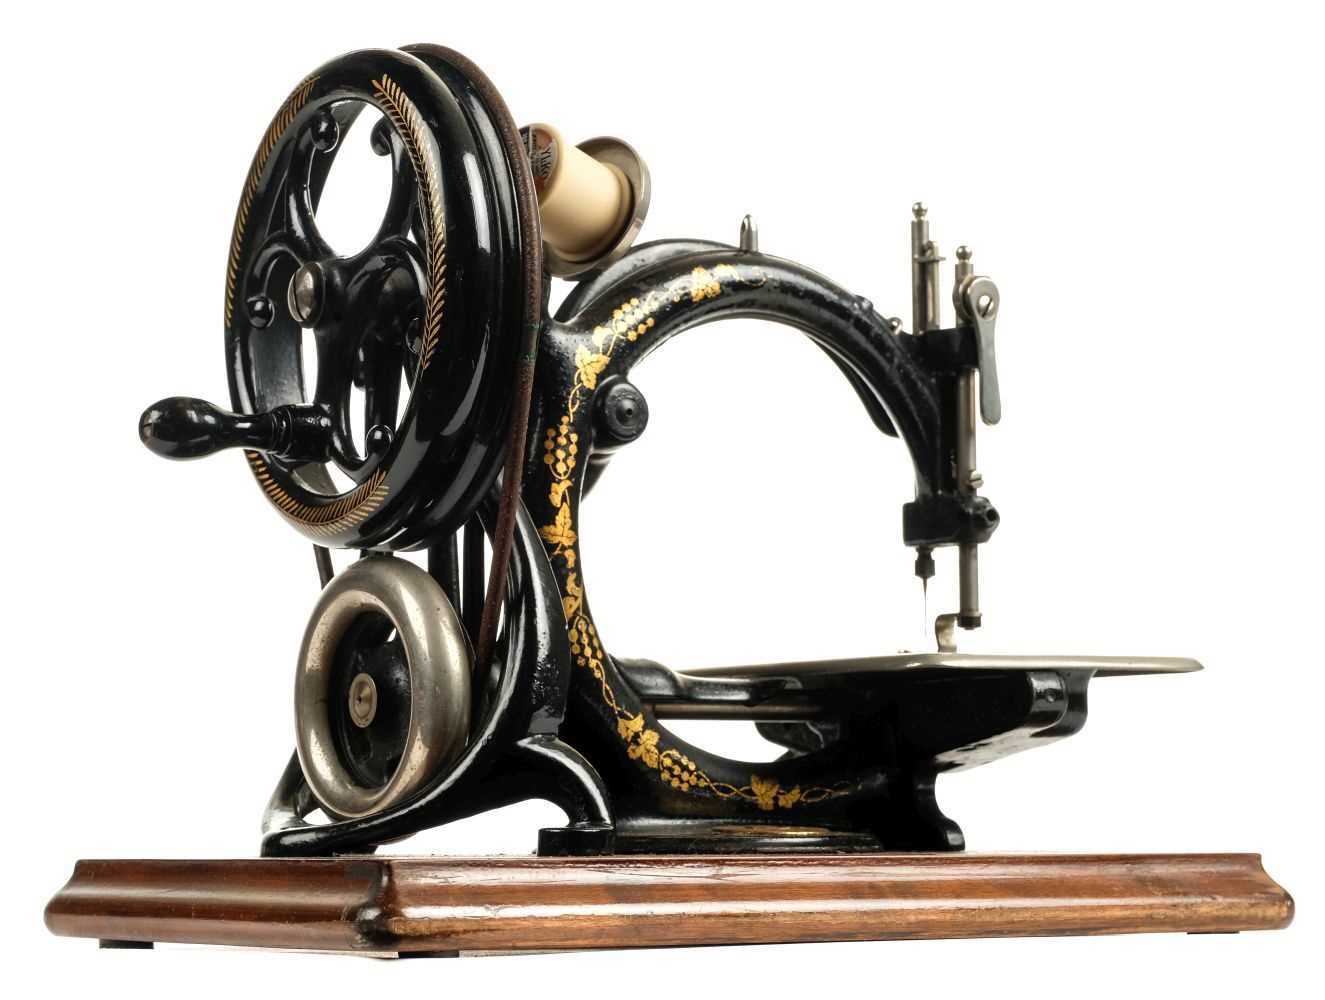 Lot 75 - Sewing machine. A late 19th century sewing machine by Willcox & Gibbs circa 1880